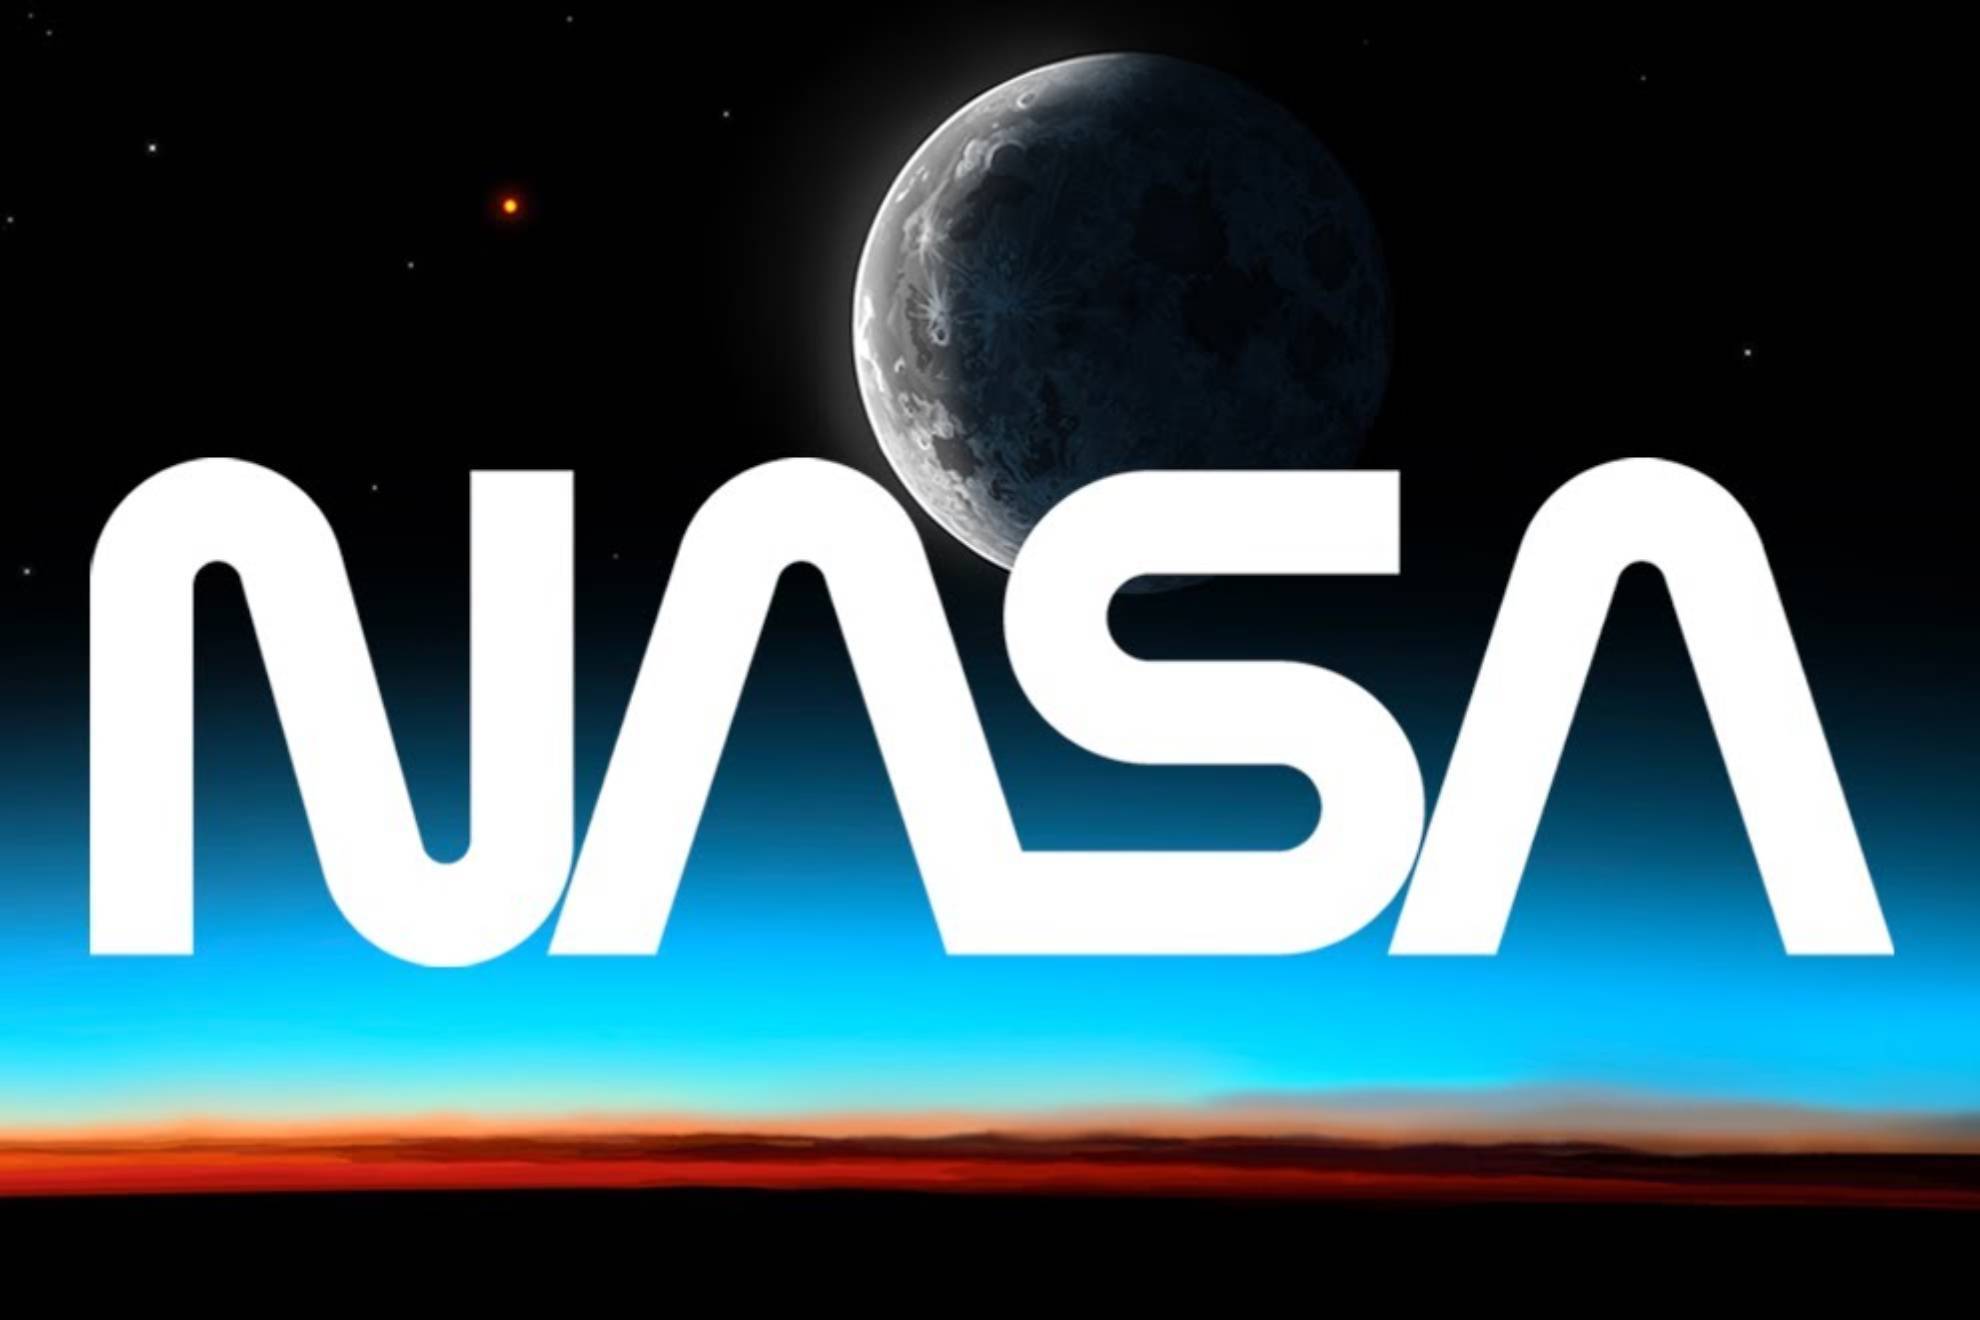 NASAs new project: building houses on the Moon by 2040